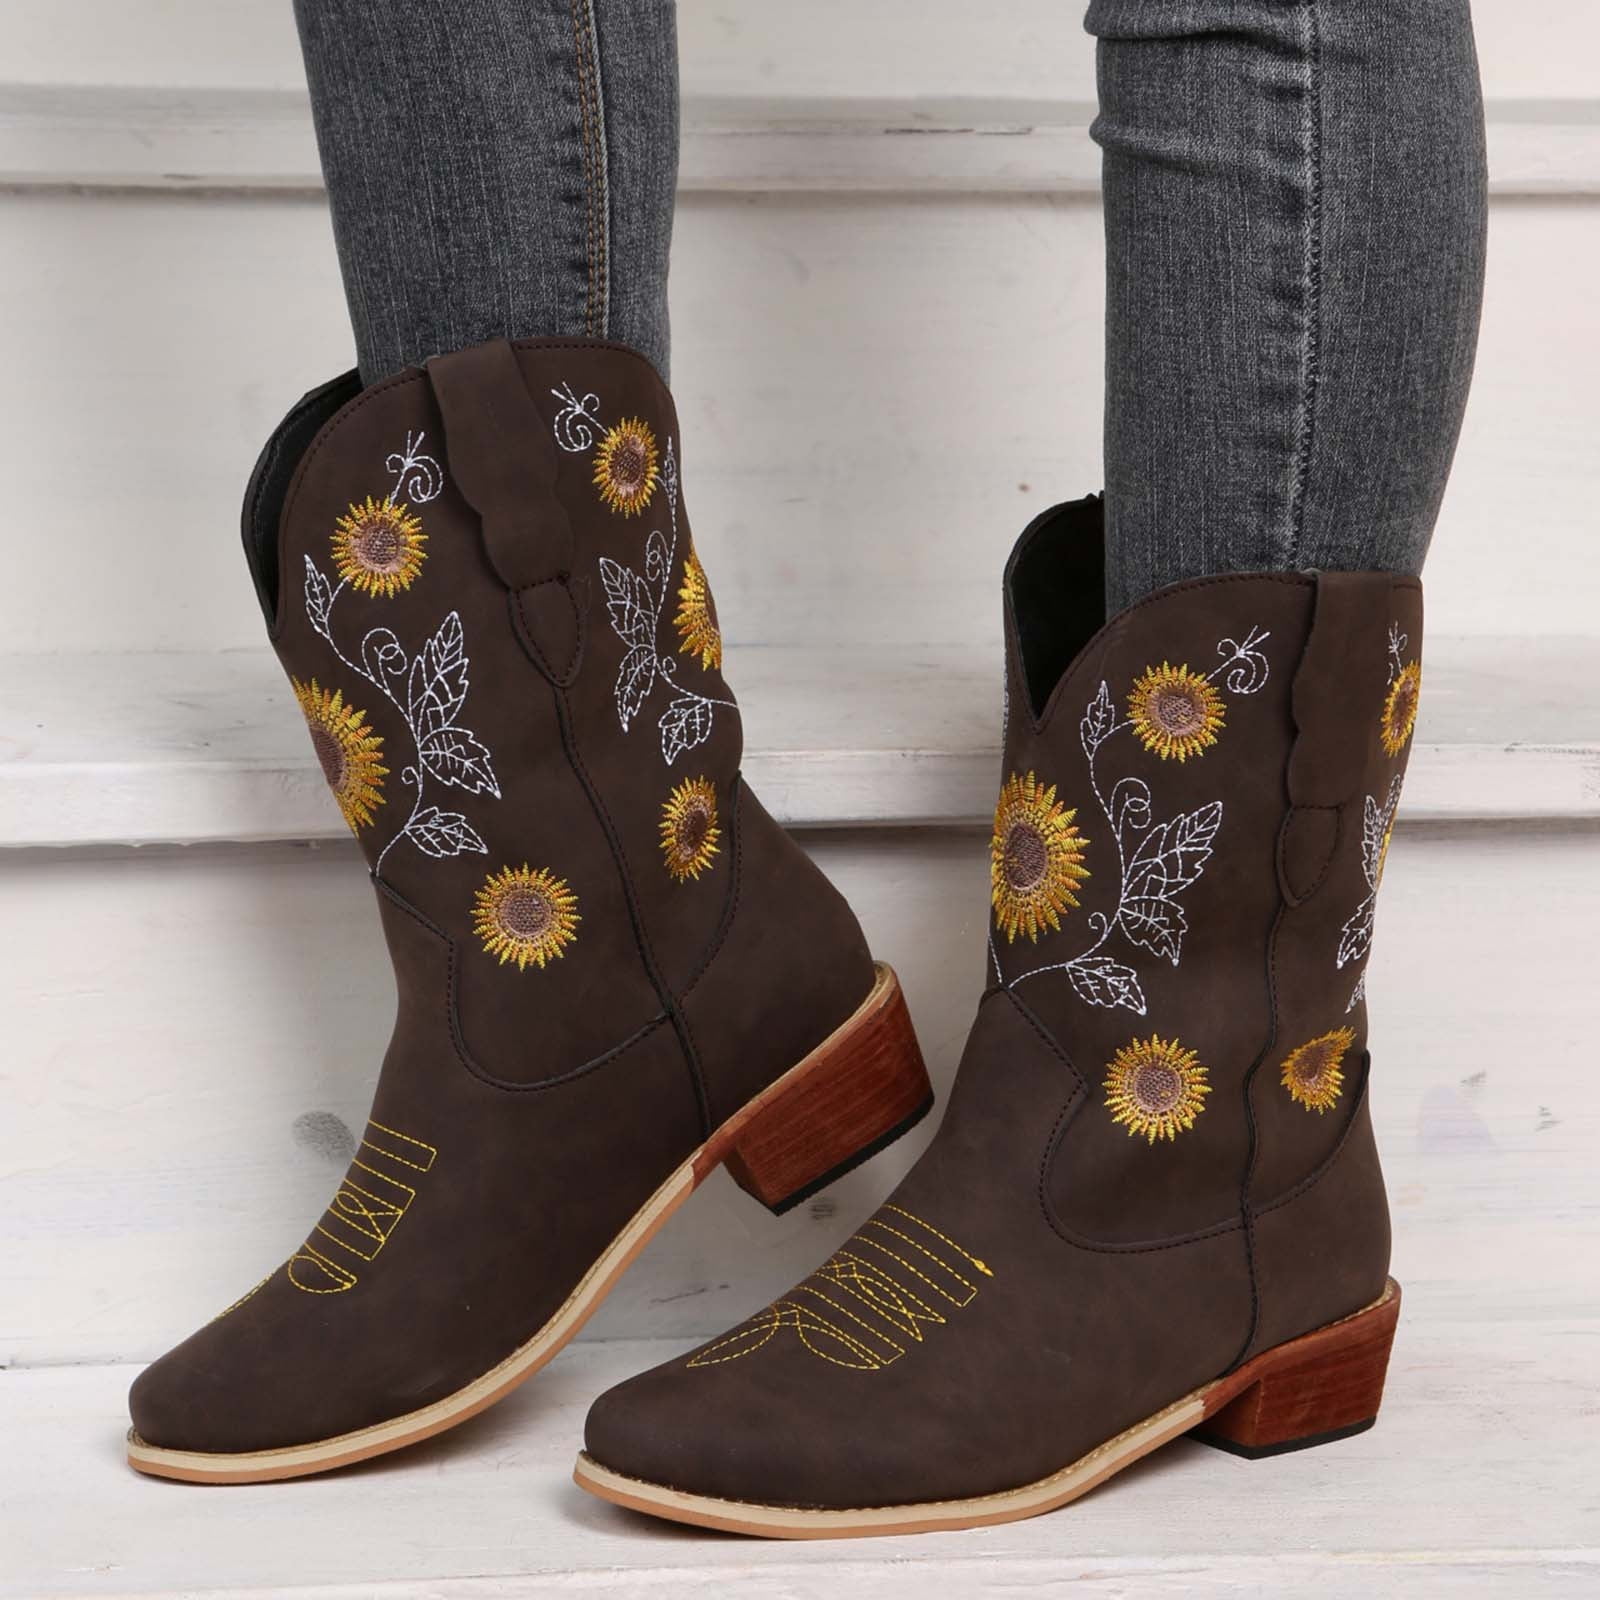 Details about   Girls Bright Blue Brown Flower Embroidered Cowgirl Leather Boots Kids Snip Toe 